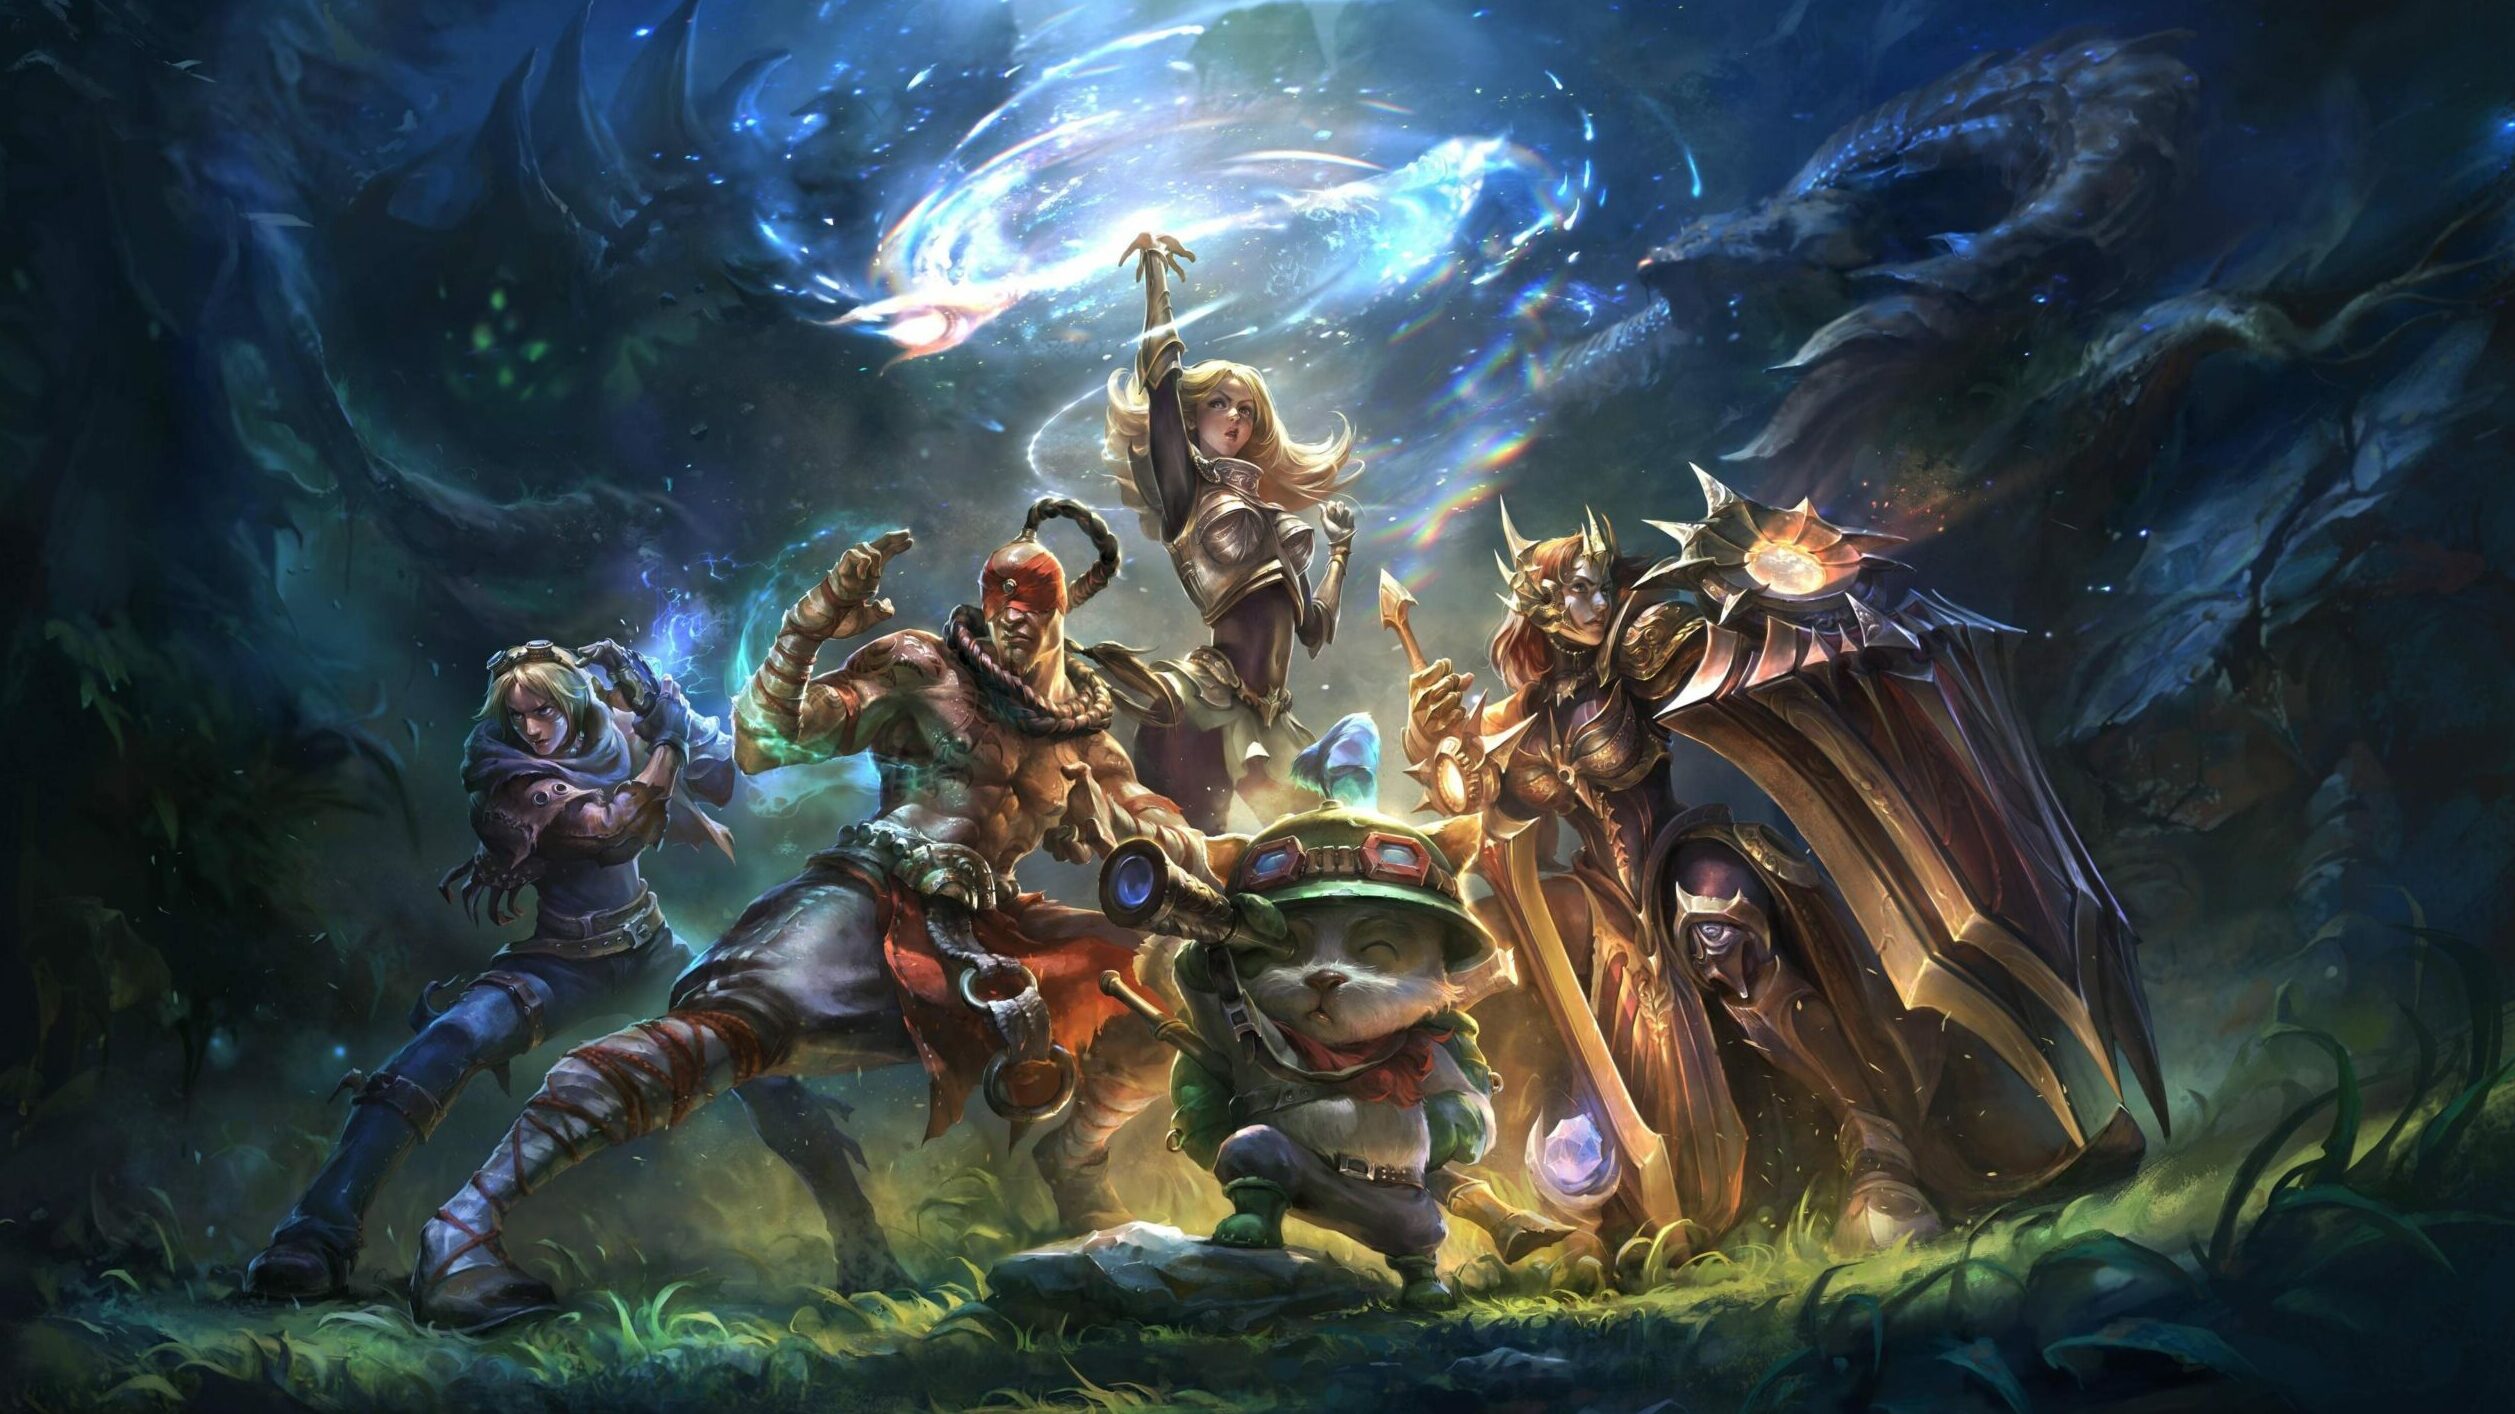 Featured image for “Here are some League of Legends communities you could join”